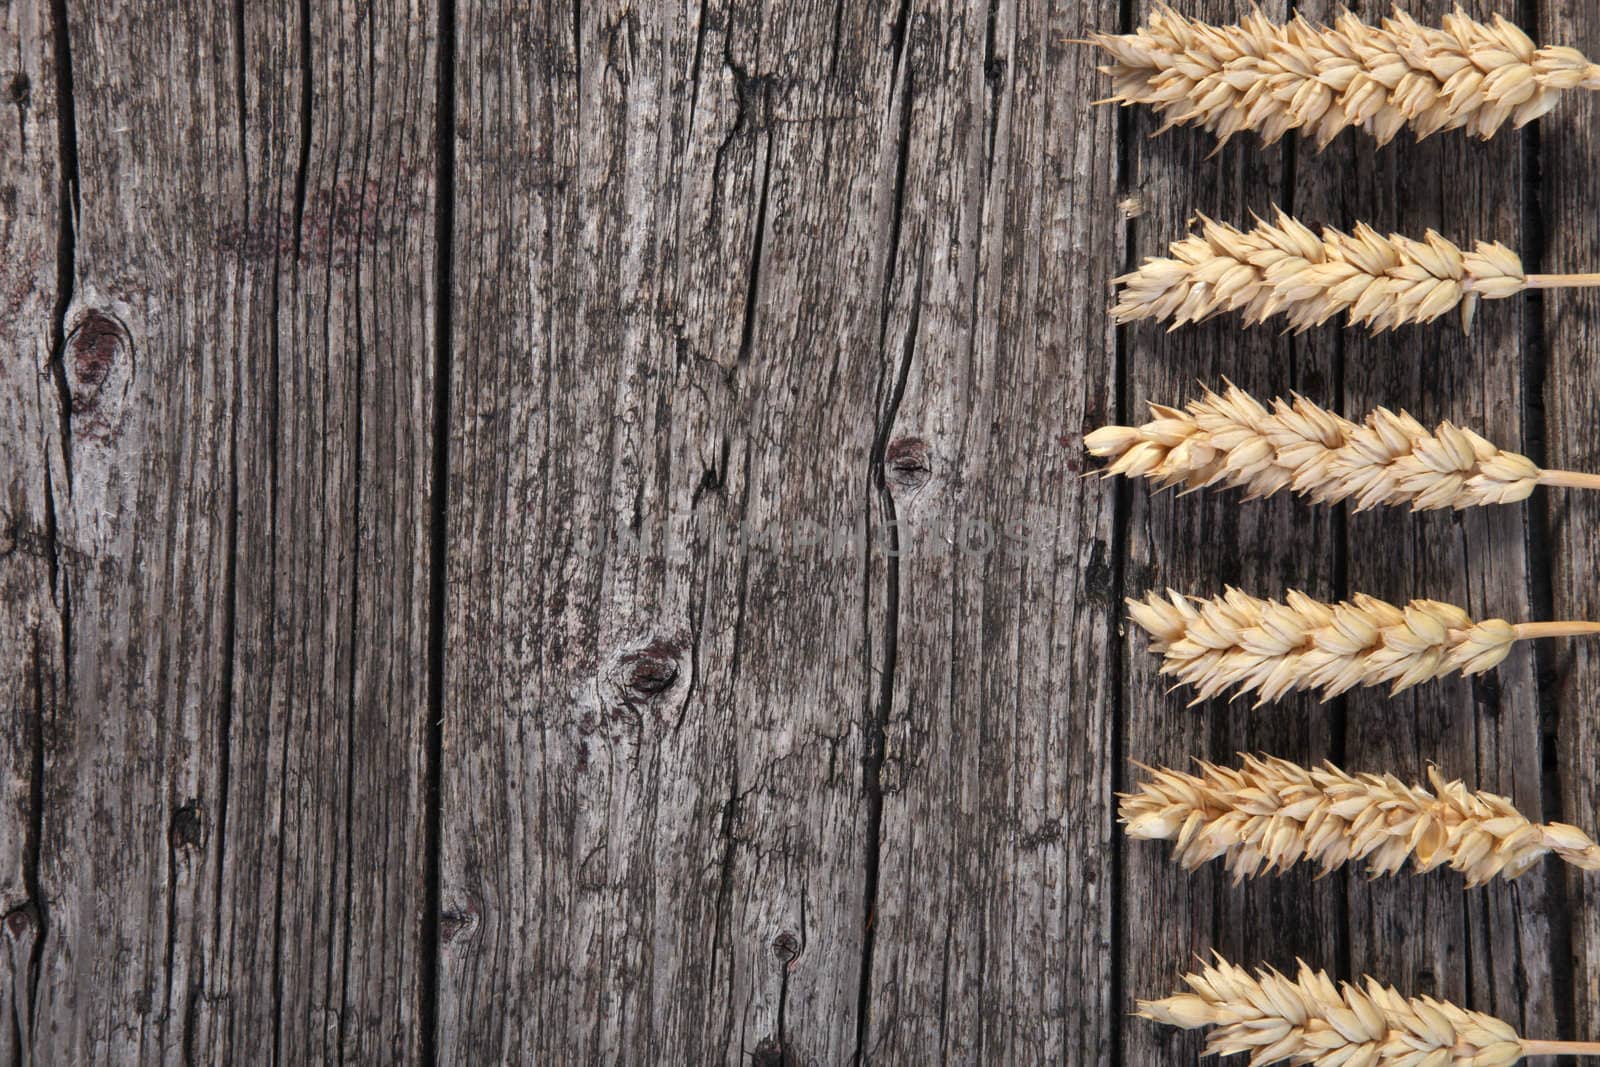 Ears of wheat on a wood background by Farina6000